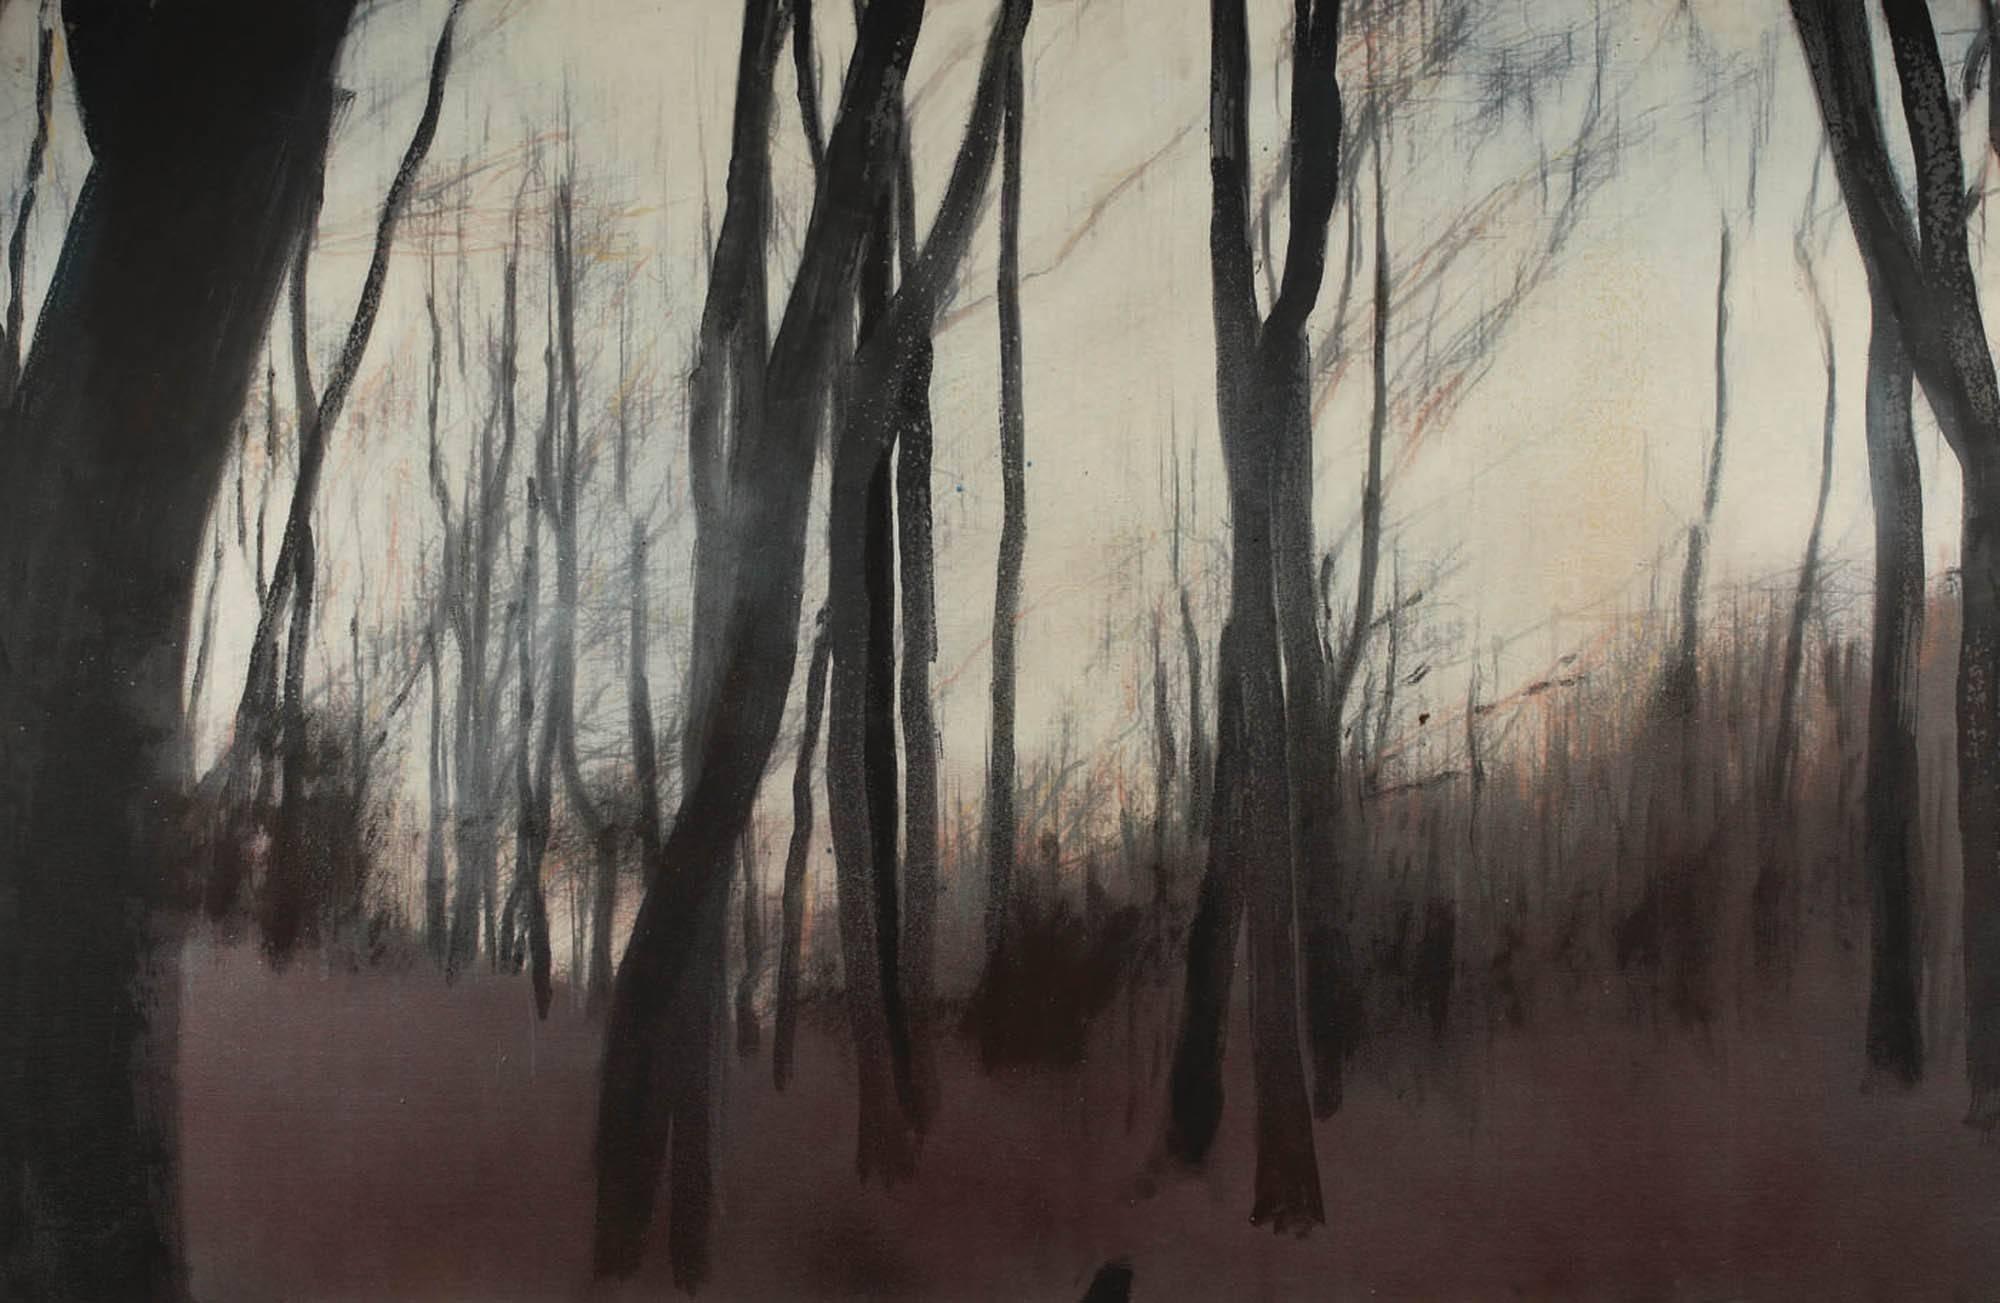 Cider forest V (diptych) - Contemporary, Landscape, Beige, Brown, Trees, Nature - Painting by Ioan Sbârciu